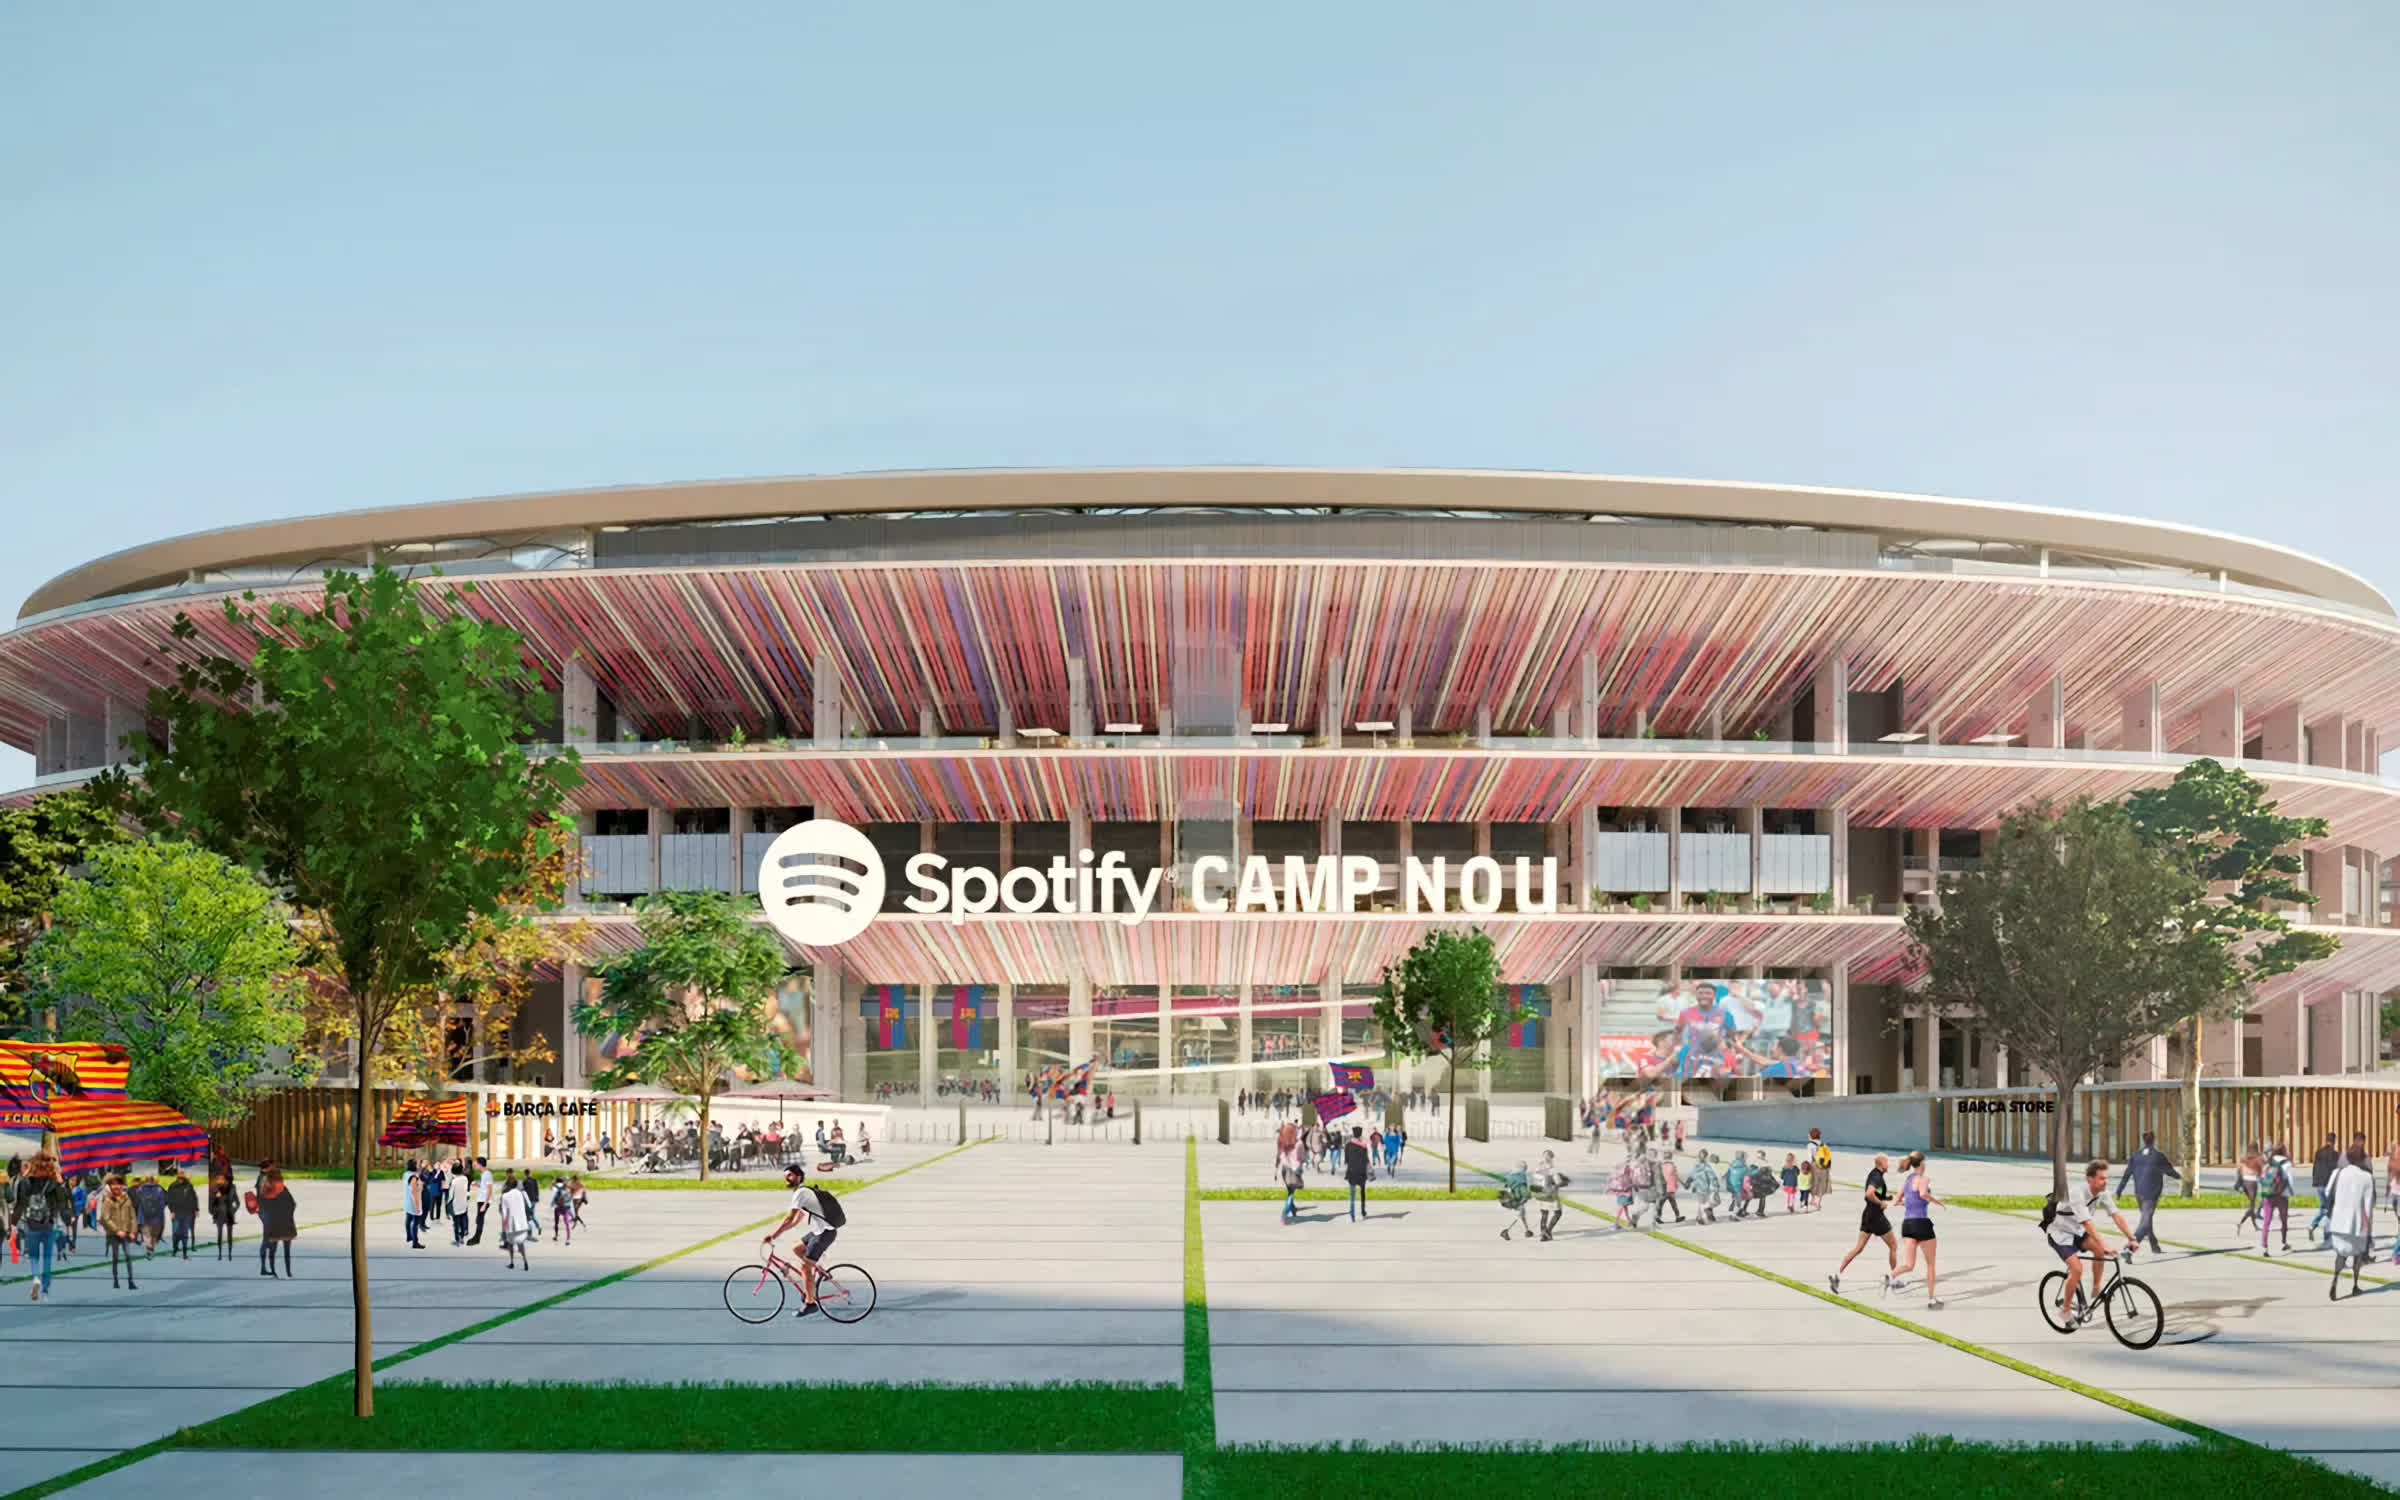 Spotify teams with FC Barcelona to become the club's main sponsor, stadium renamed 'Spotify Camp Nou'